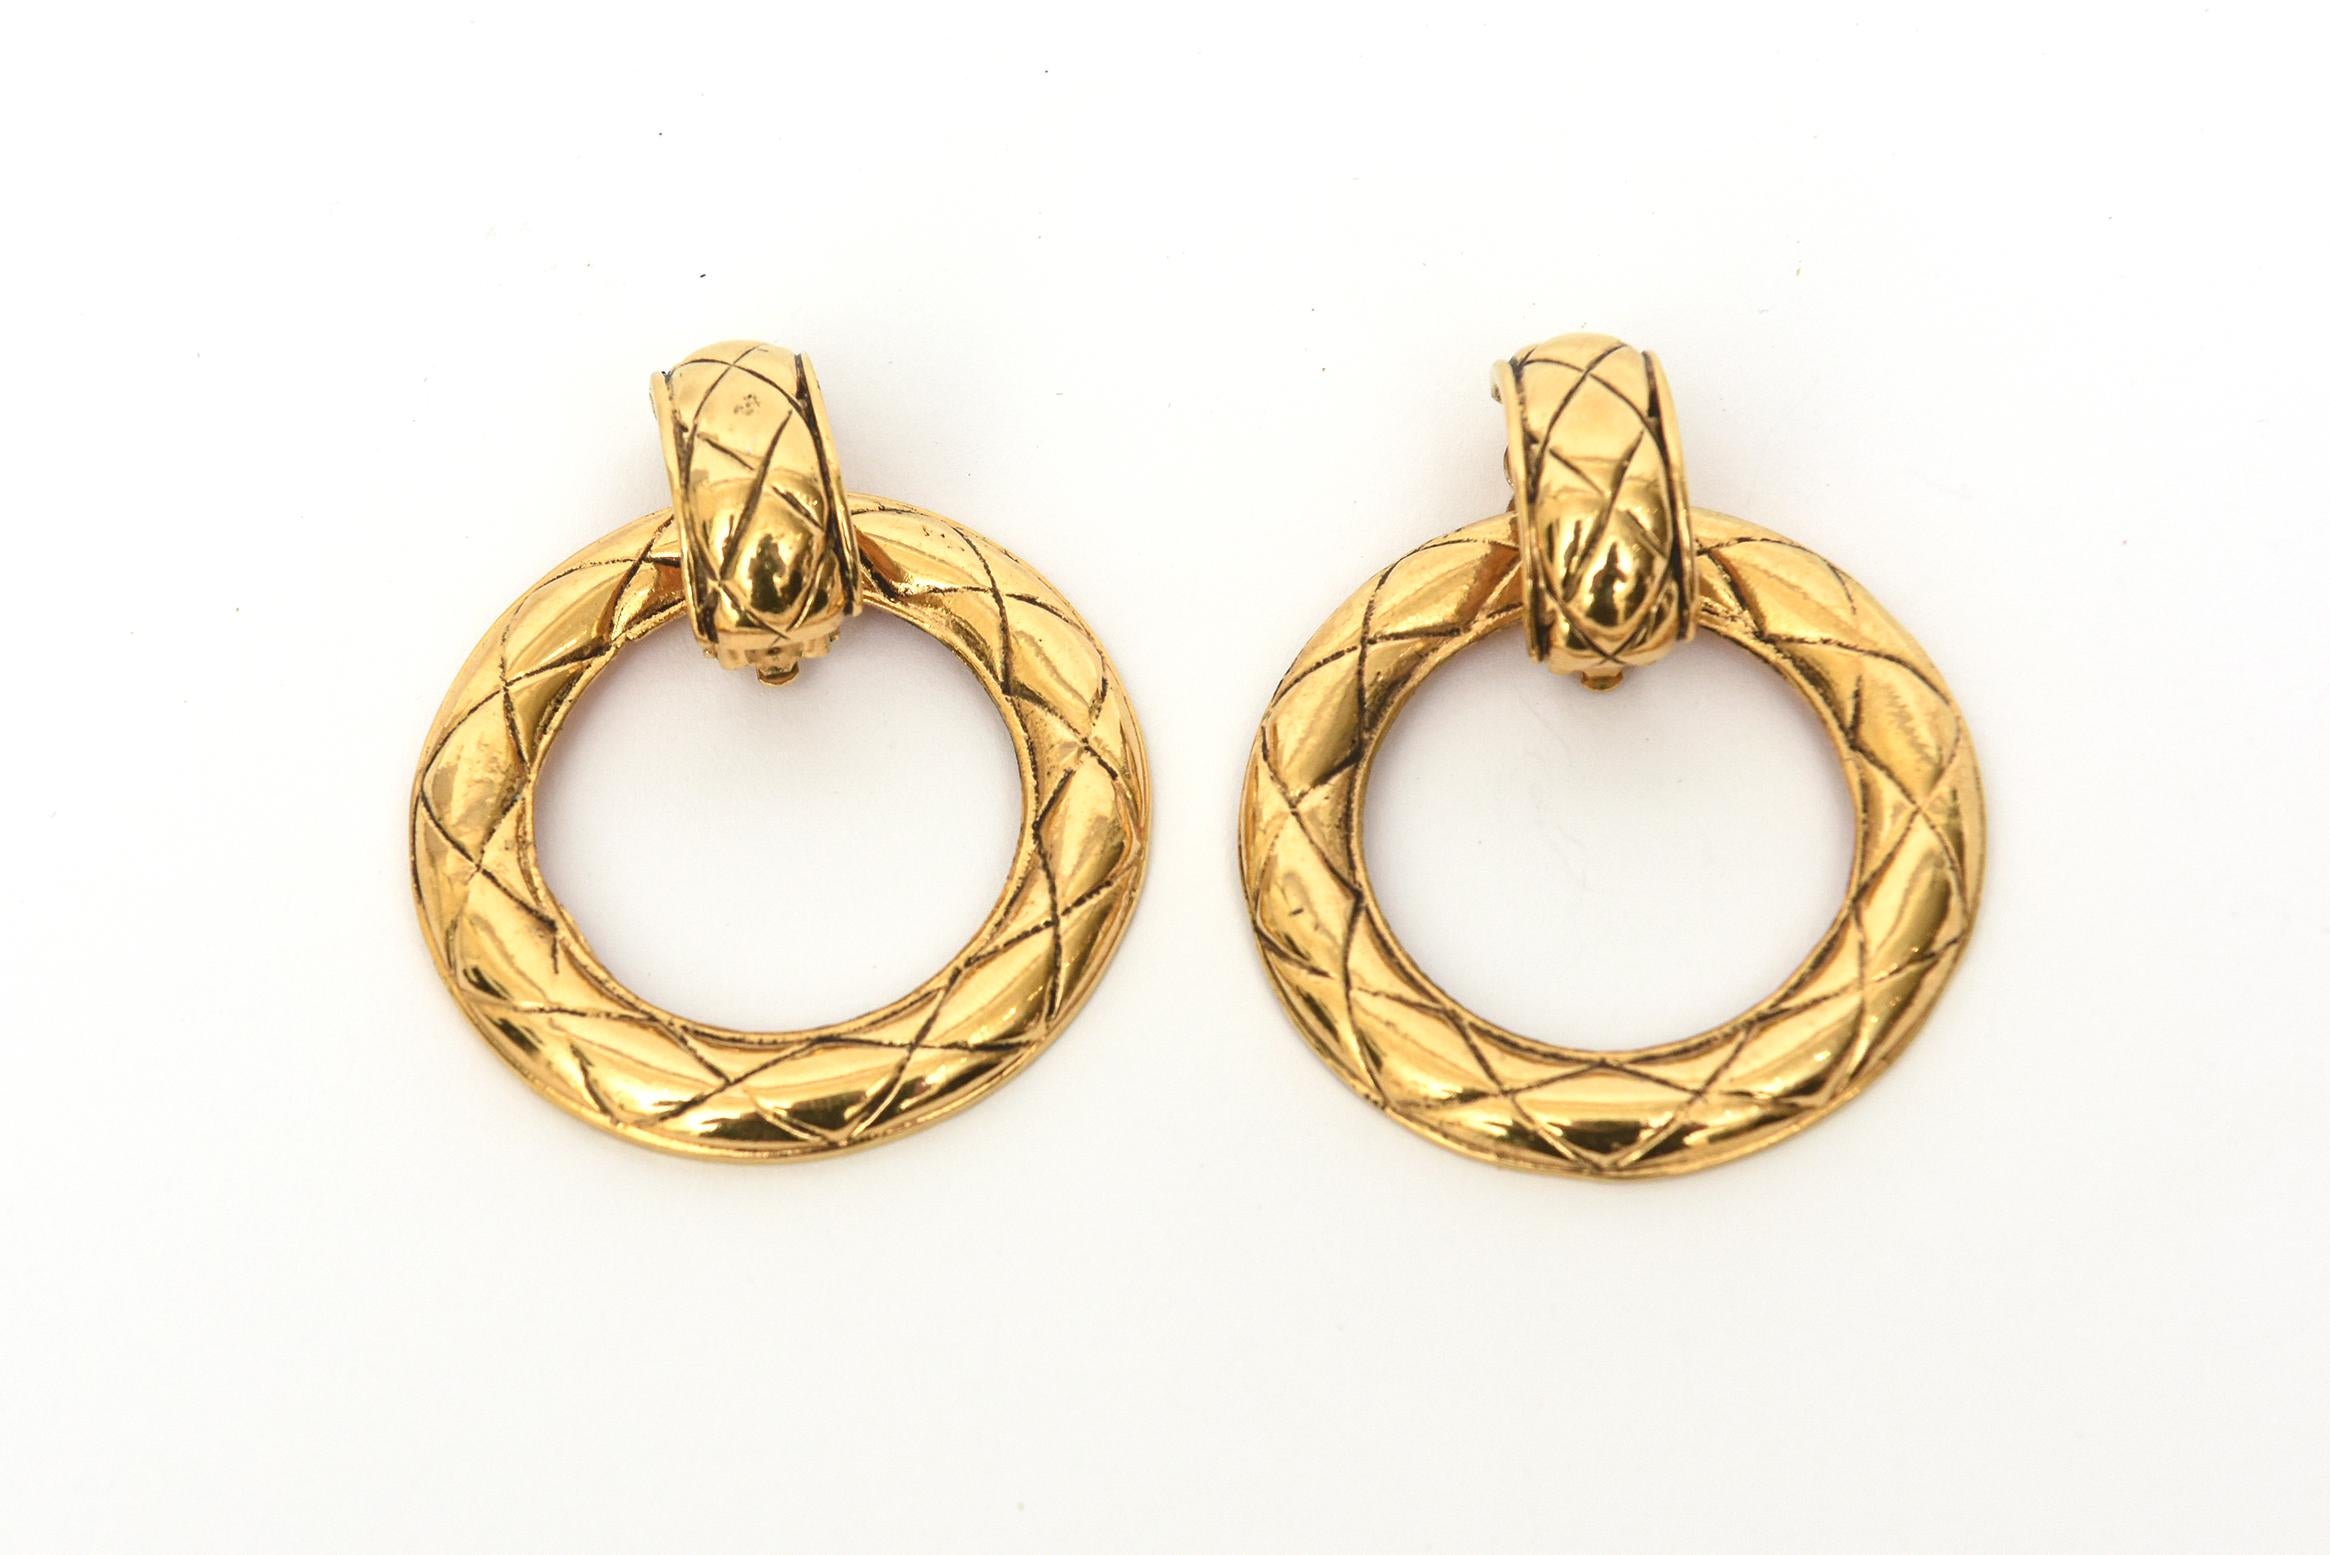 These fabulous pair of 80's chic vintage Chanel clip on earrings are quilted gold metal hoops with a connector. They  are really able to be 2 earrings in one. The connector can be worn on the ear lobe separately. The hoop part is 2